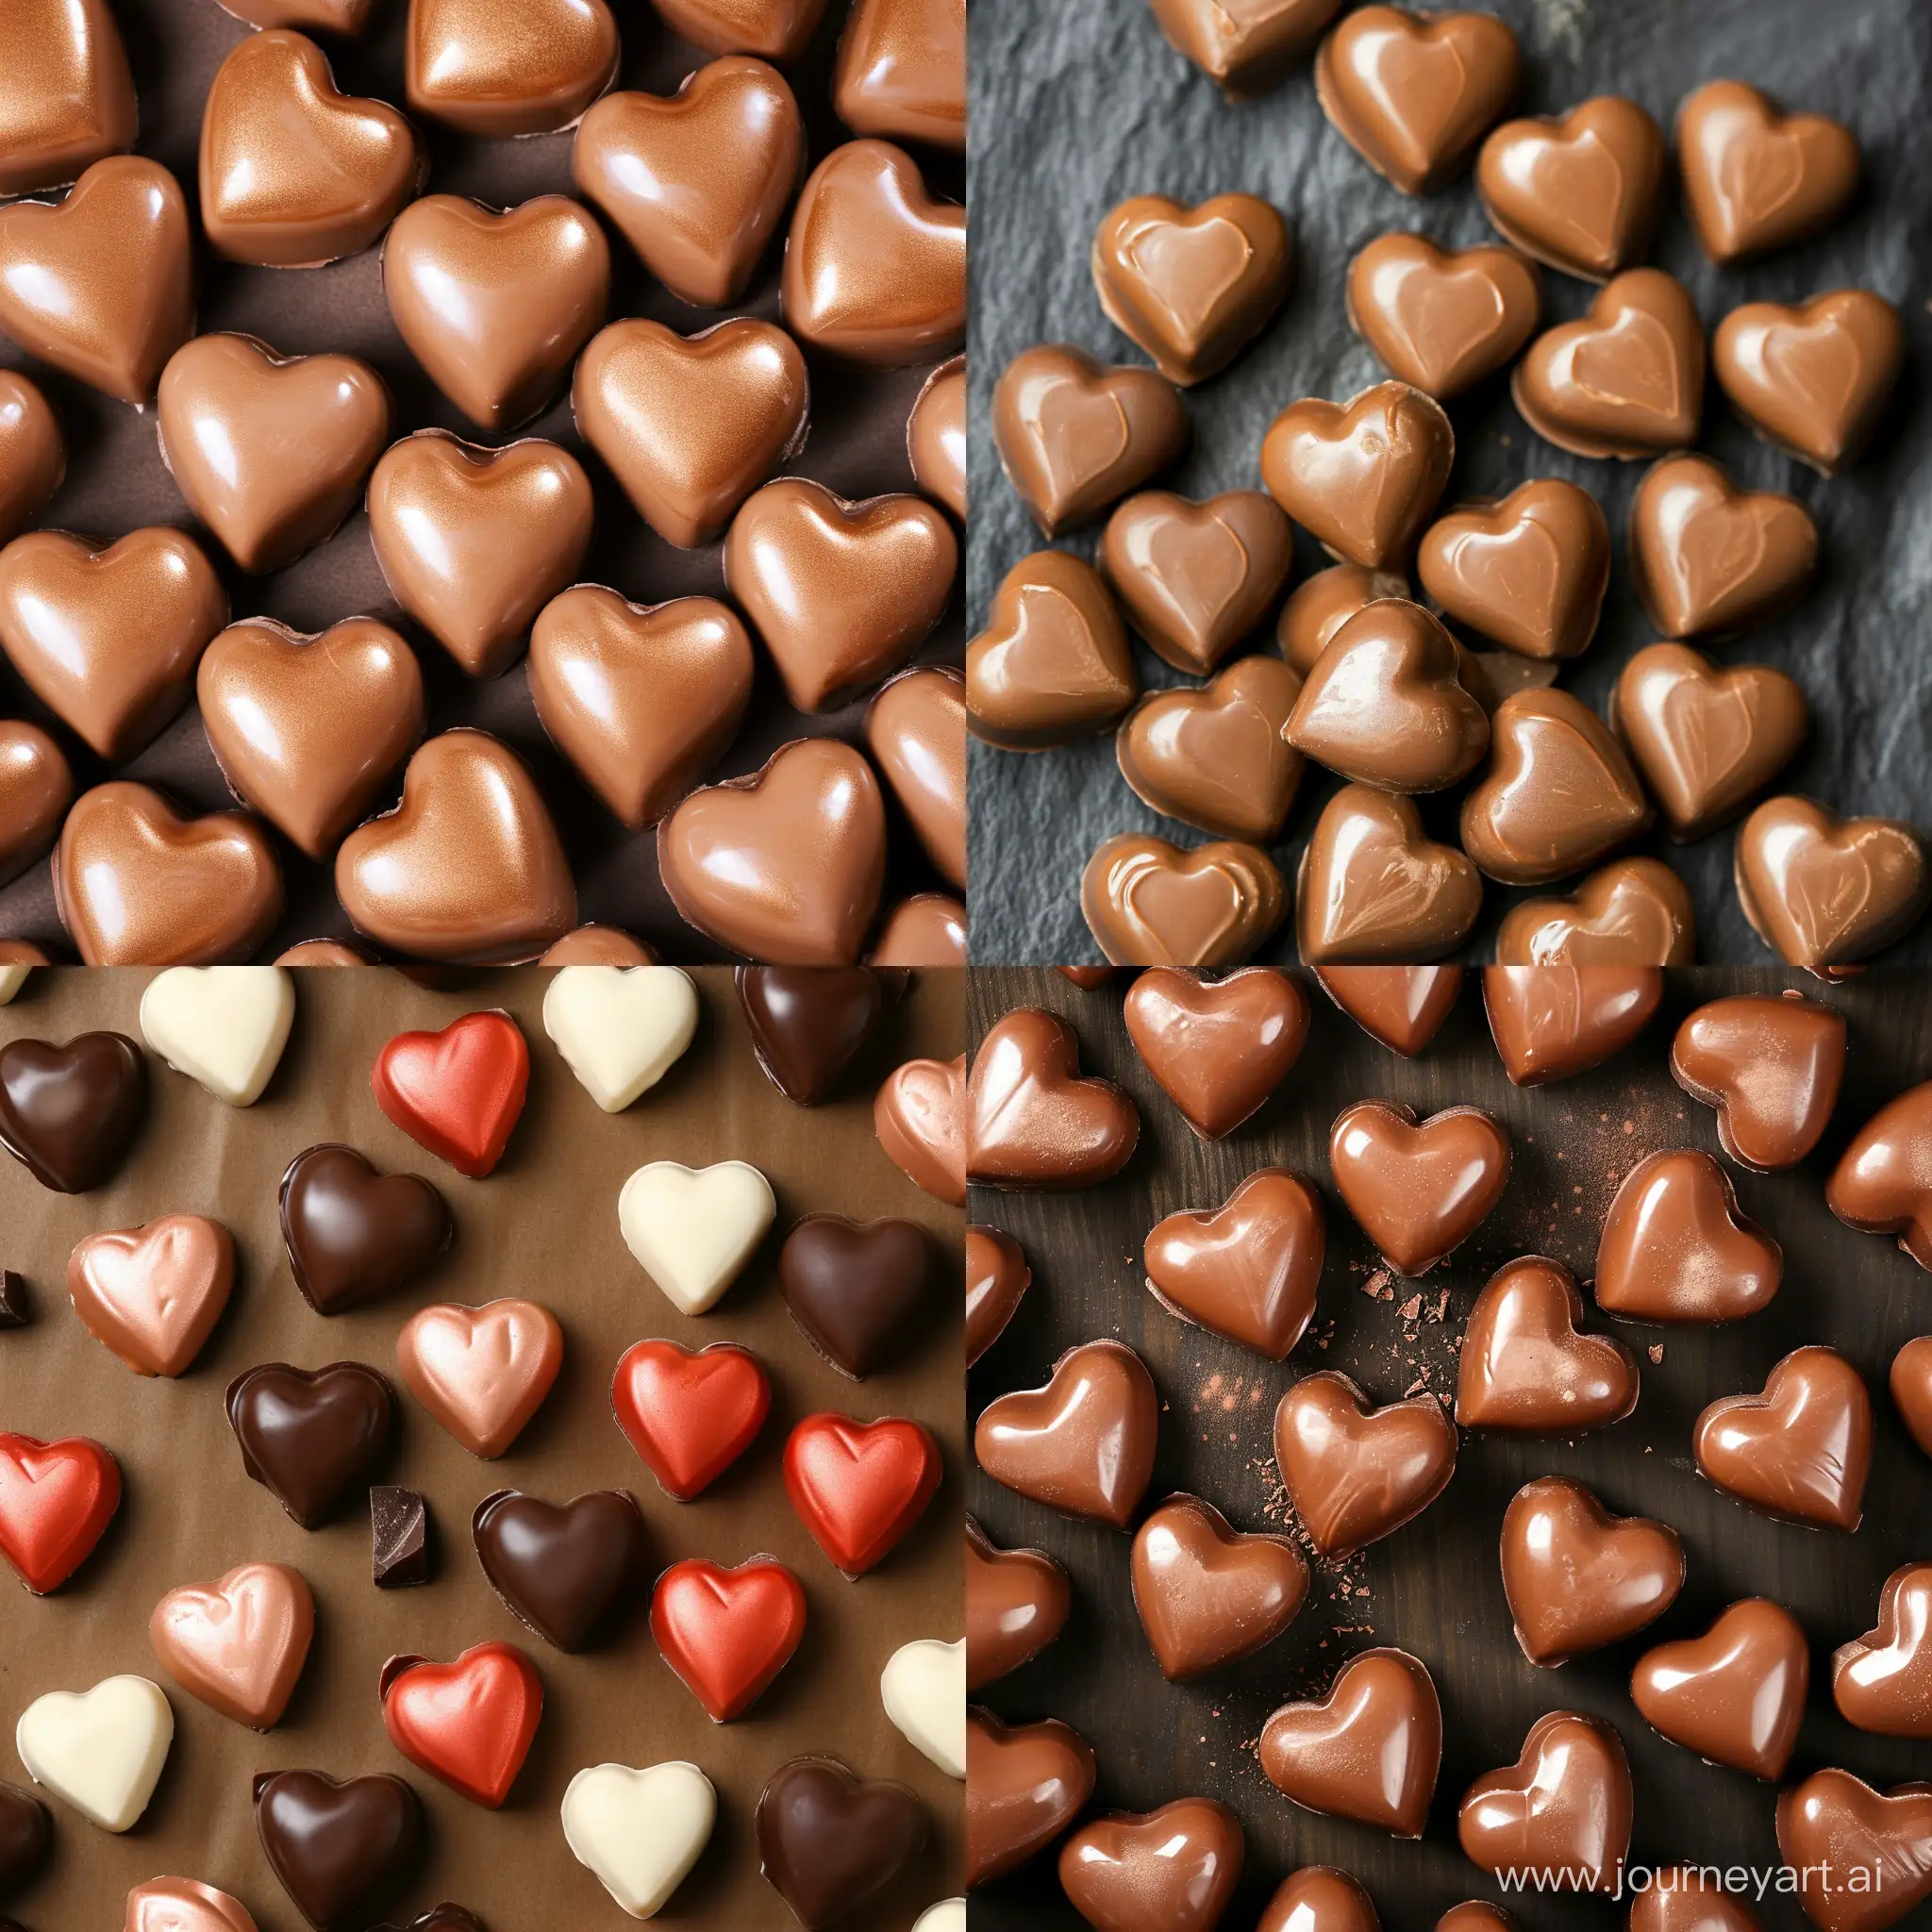 Background with chocolate hearts candies